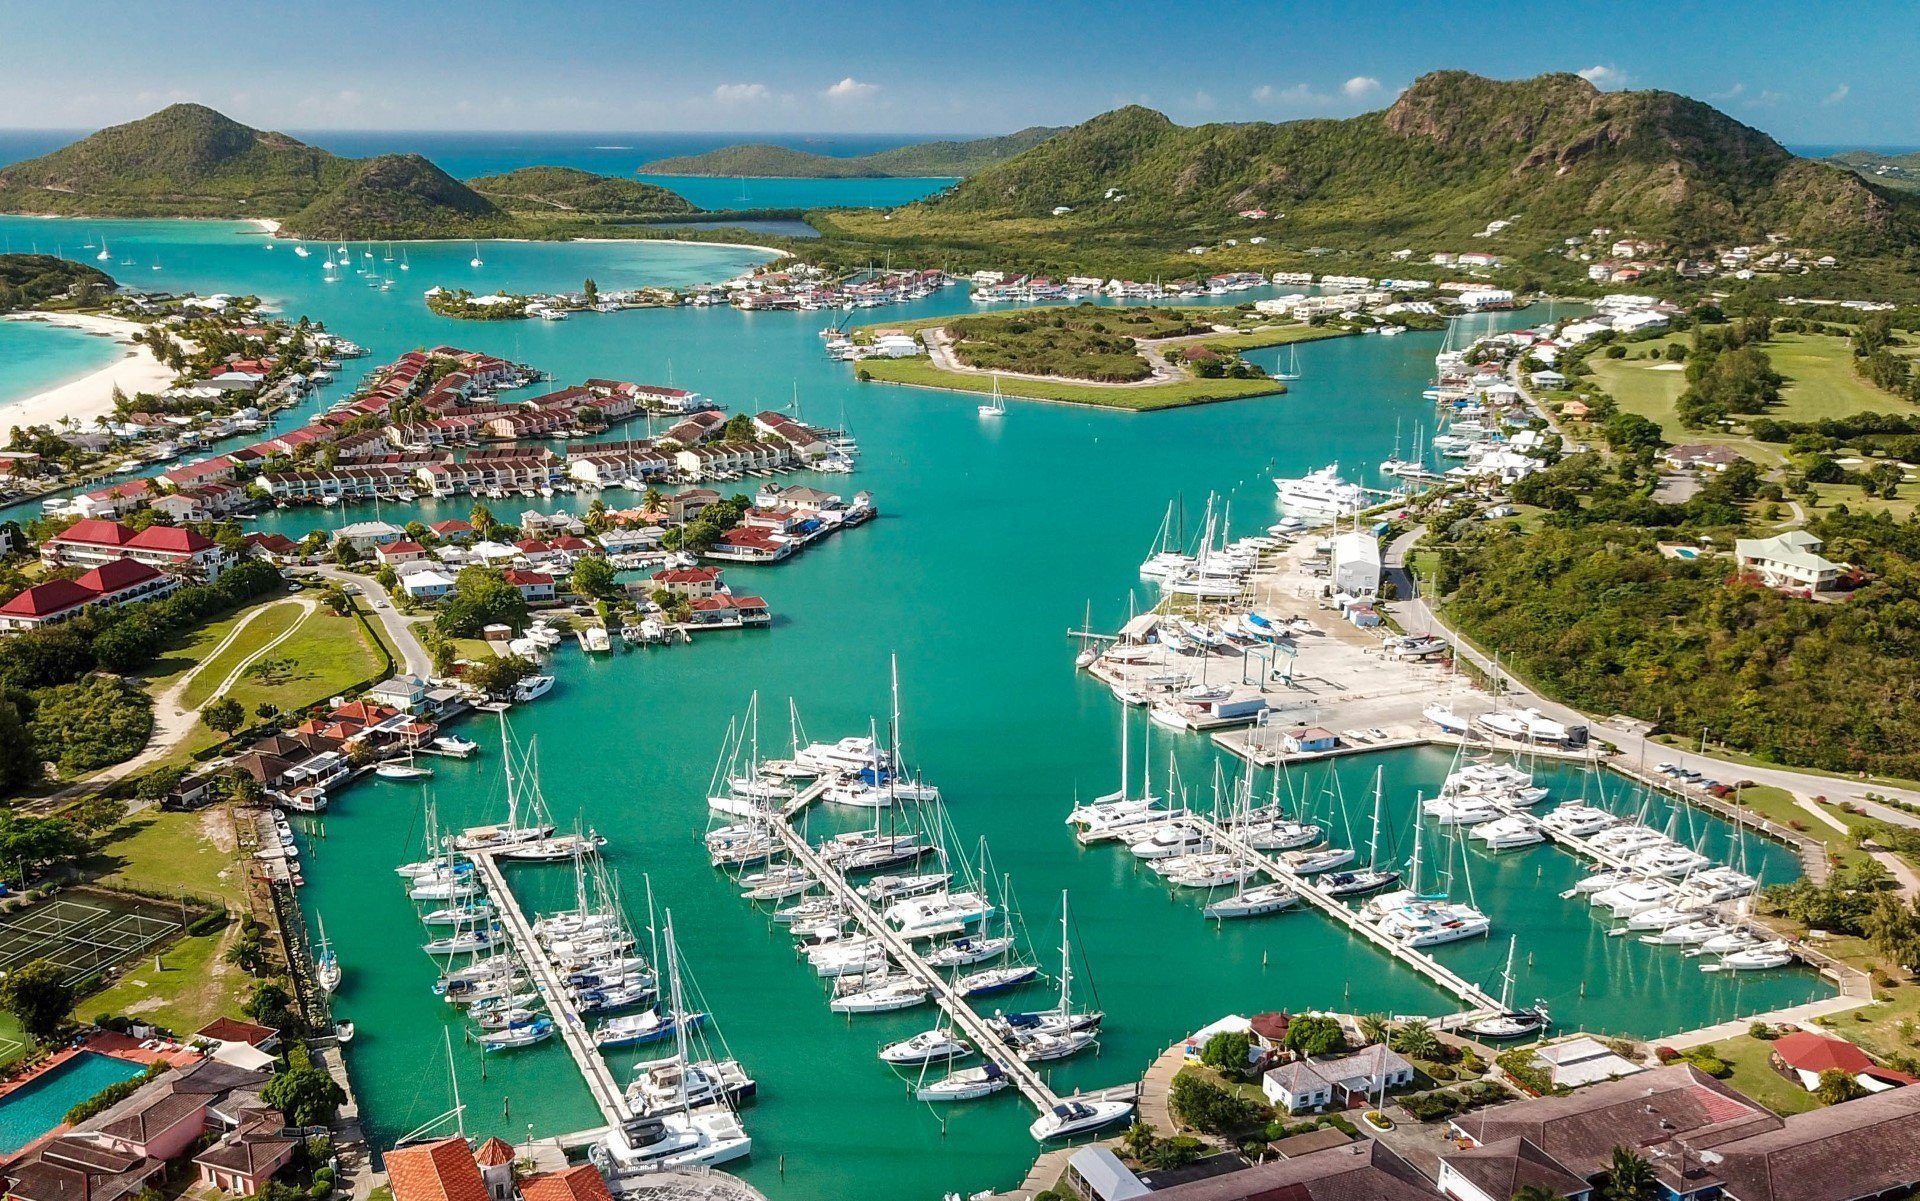 Jolly Harbour Golf Course and Marina in Antigua and Barbuda